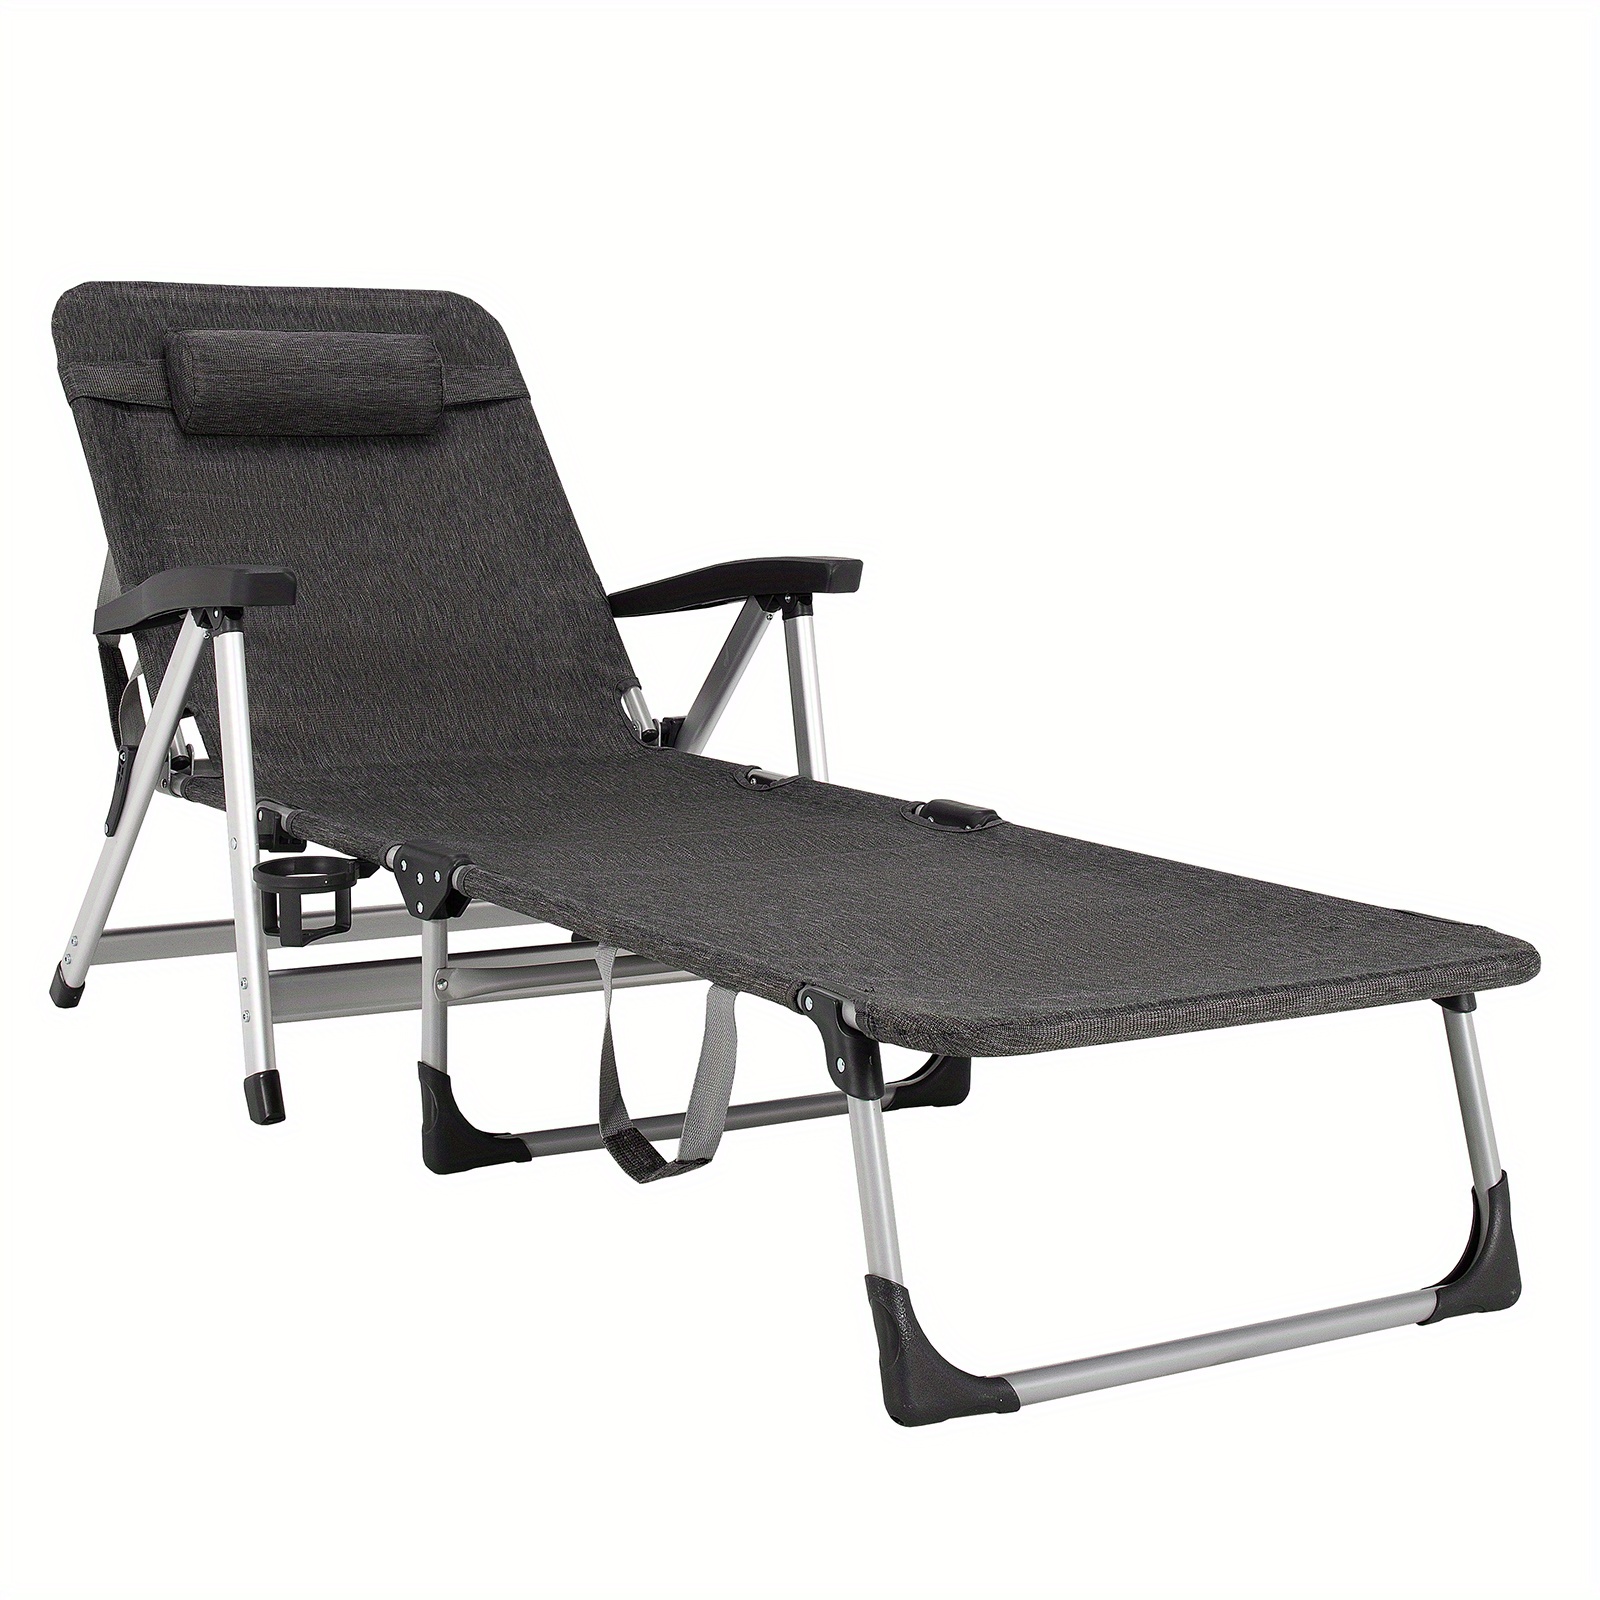 

Lifezeal Beach Chaise Lounge Chair Patio Folding Recliner W/ 7 Adjustable Positions Grey